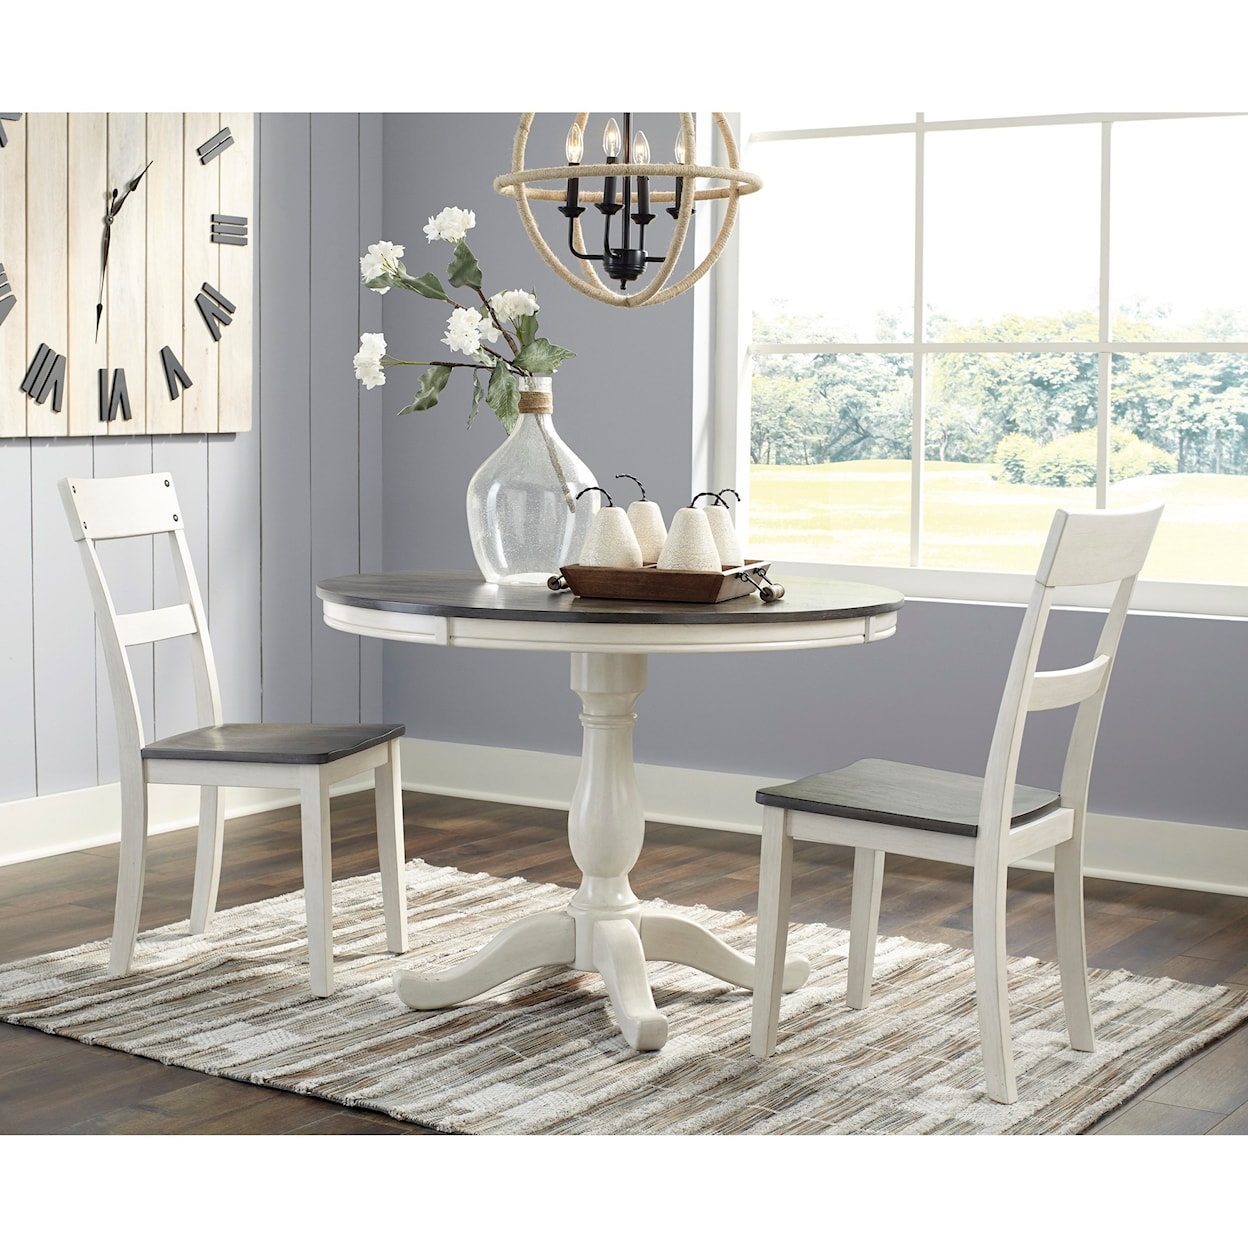 Michael Alan Select Nelling Dining Room Table